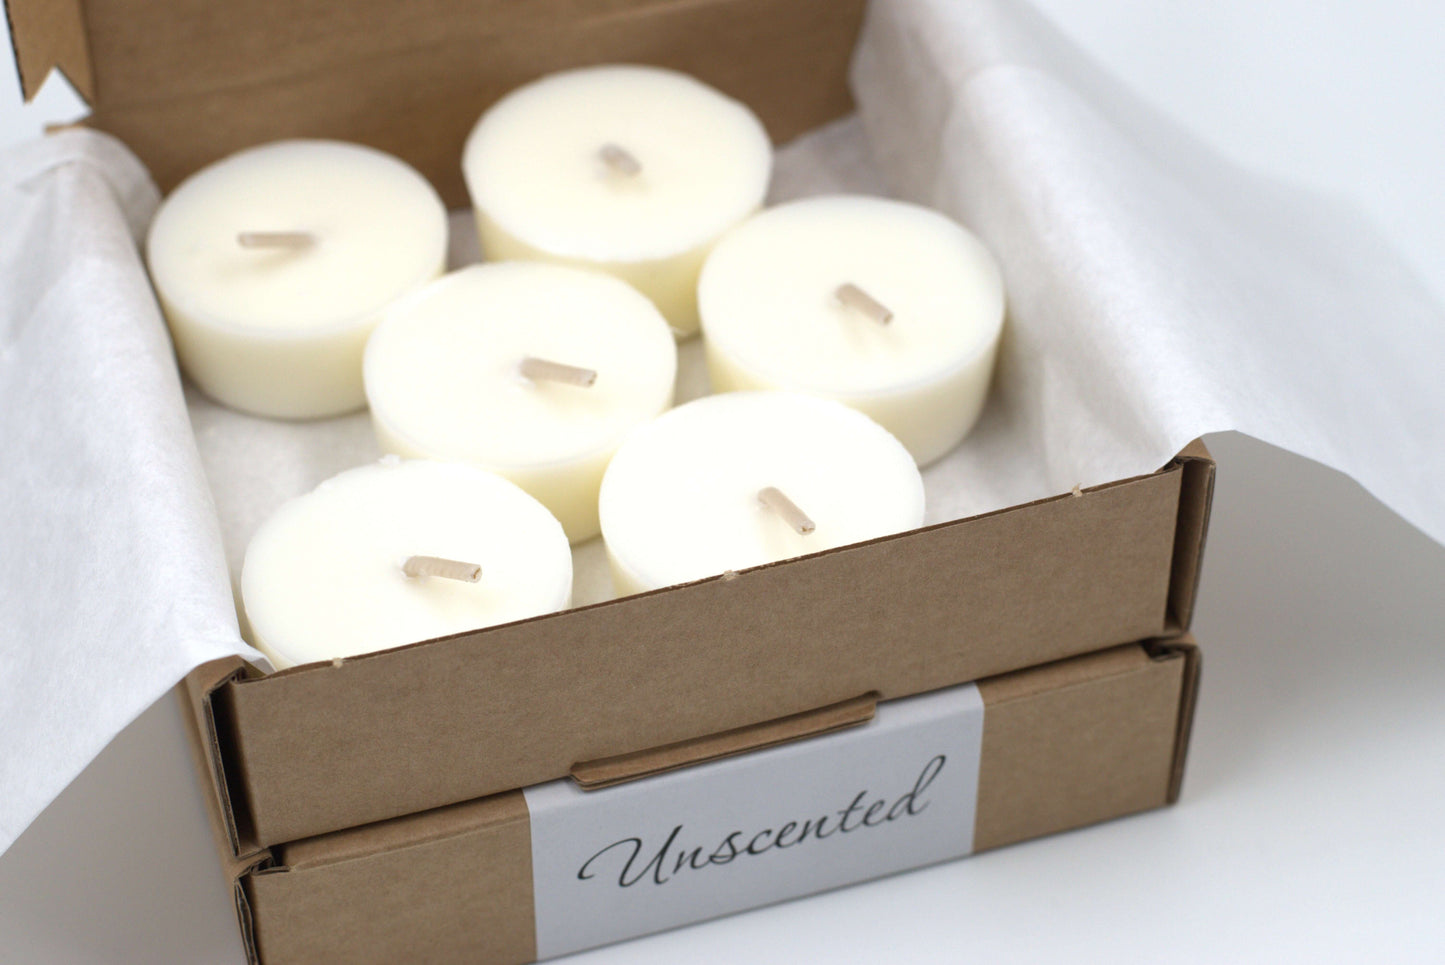 Close-up of six unscented tea light candles arranged in a cardboard box, designed as eco-friendly refills for tea light holders.